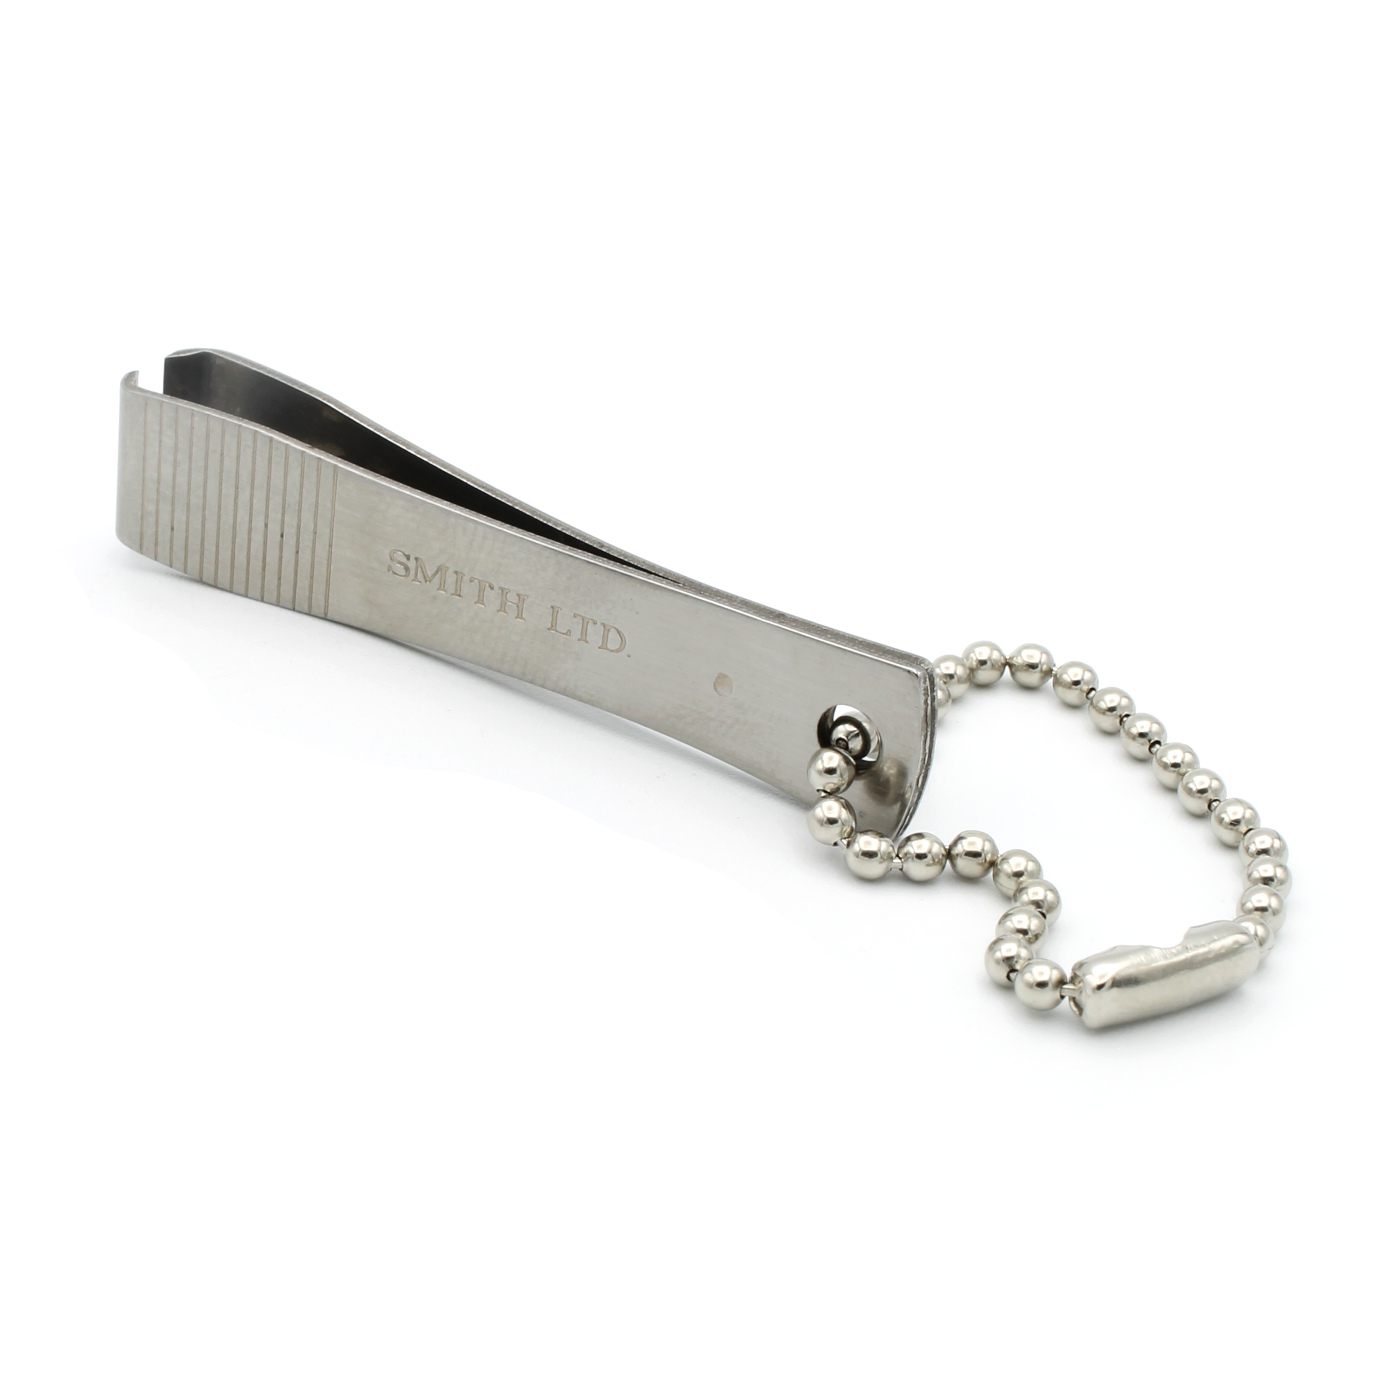  Braided Line Clippers